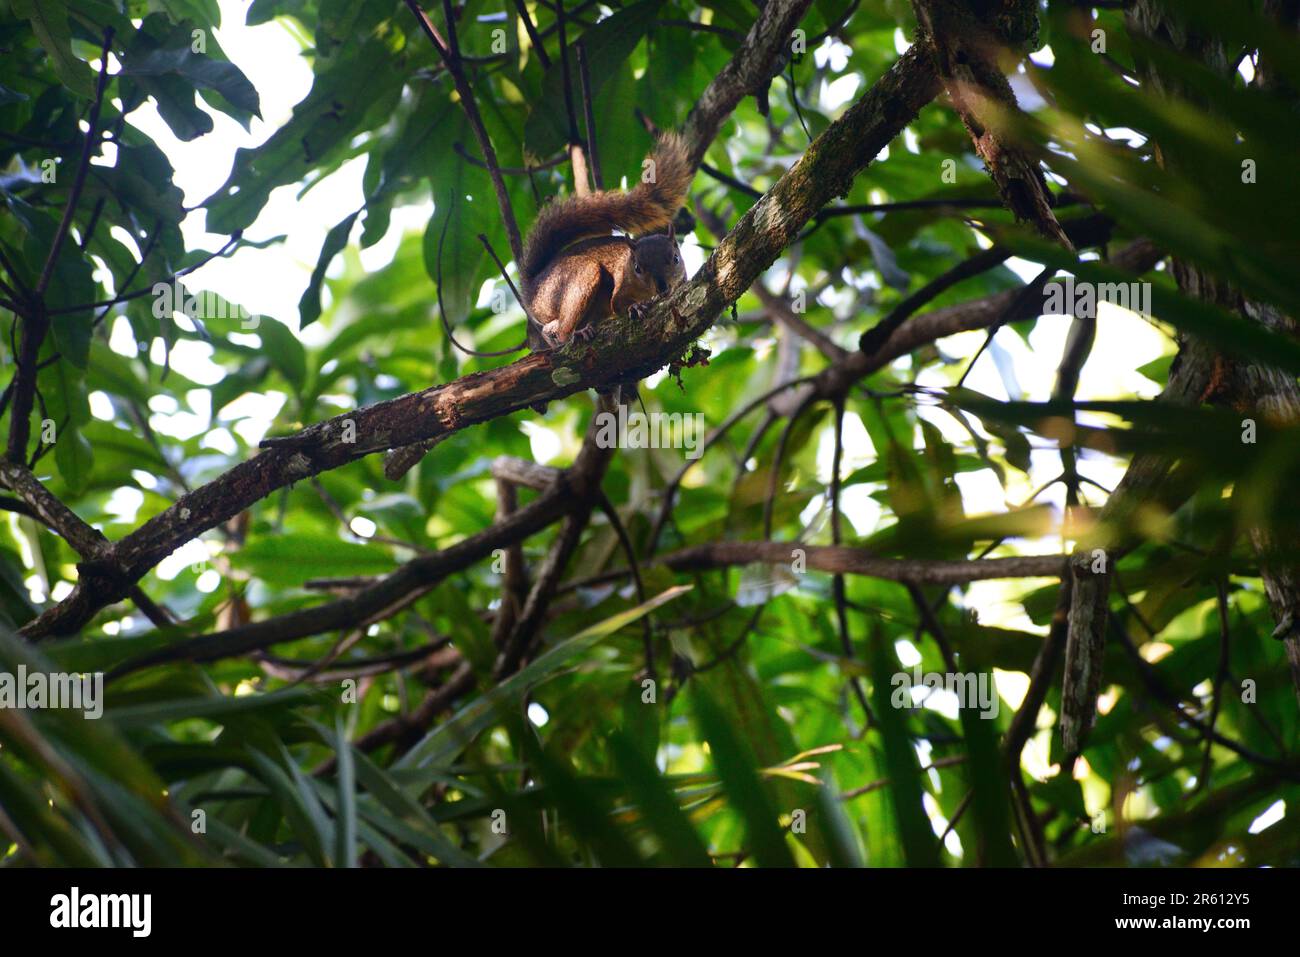 A red tailed squirrel in the forest near the Cahuita National Park, overlooking the Caribbean Sea, Costa Rica. Stock Photo